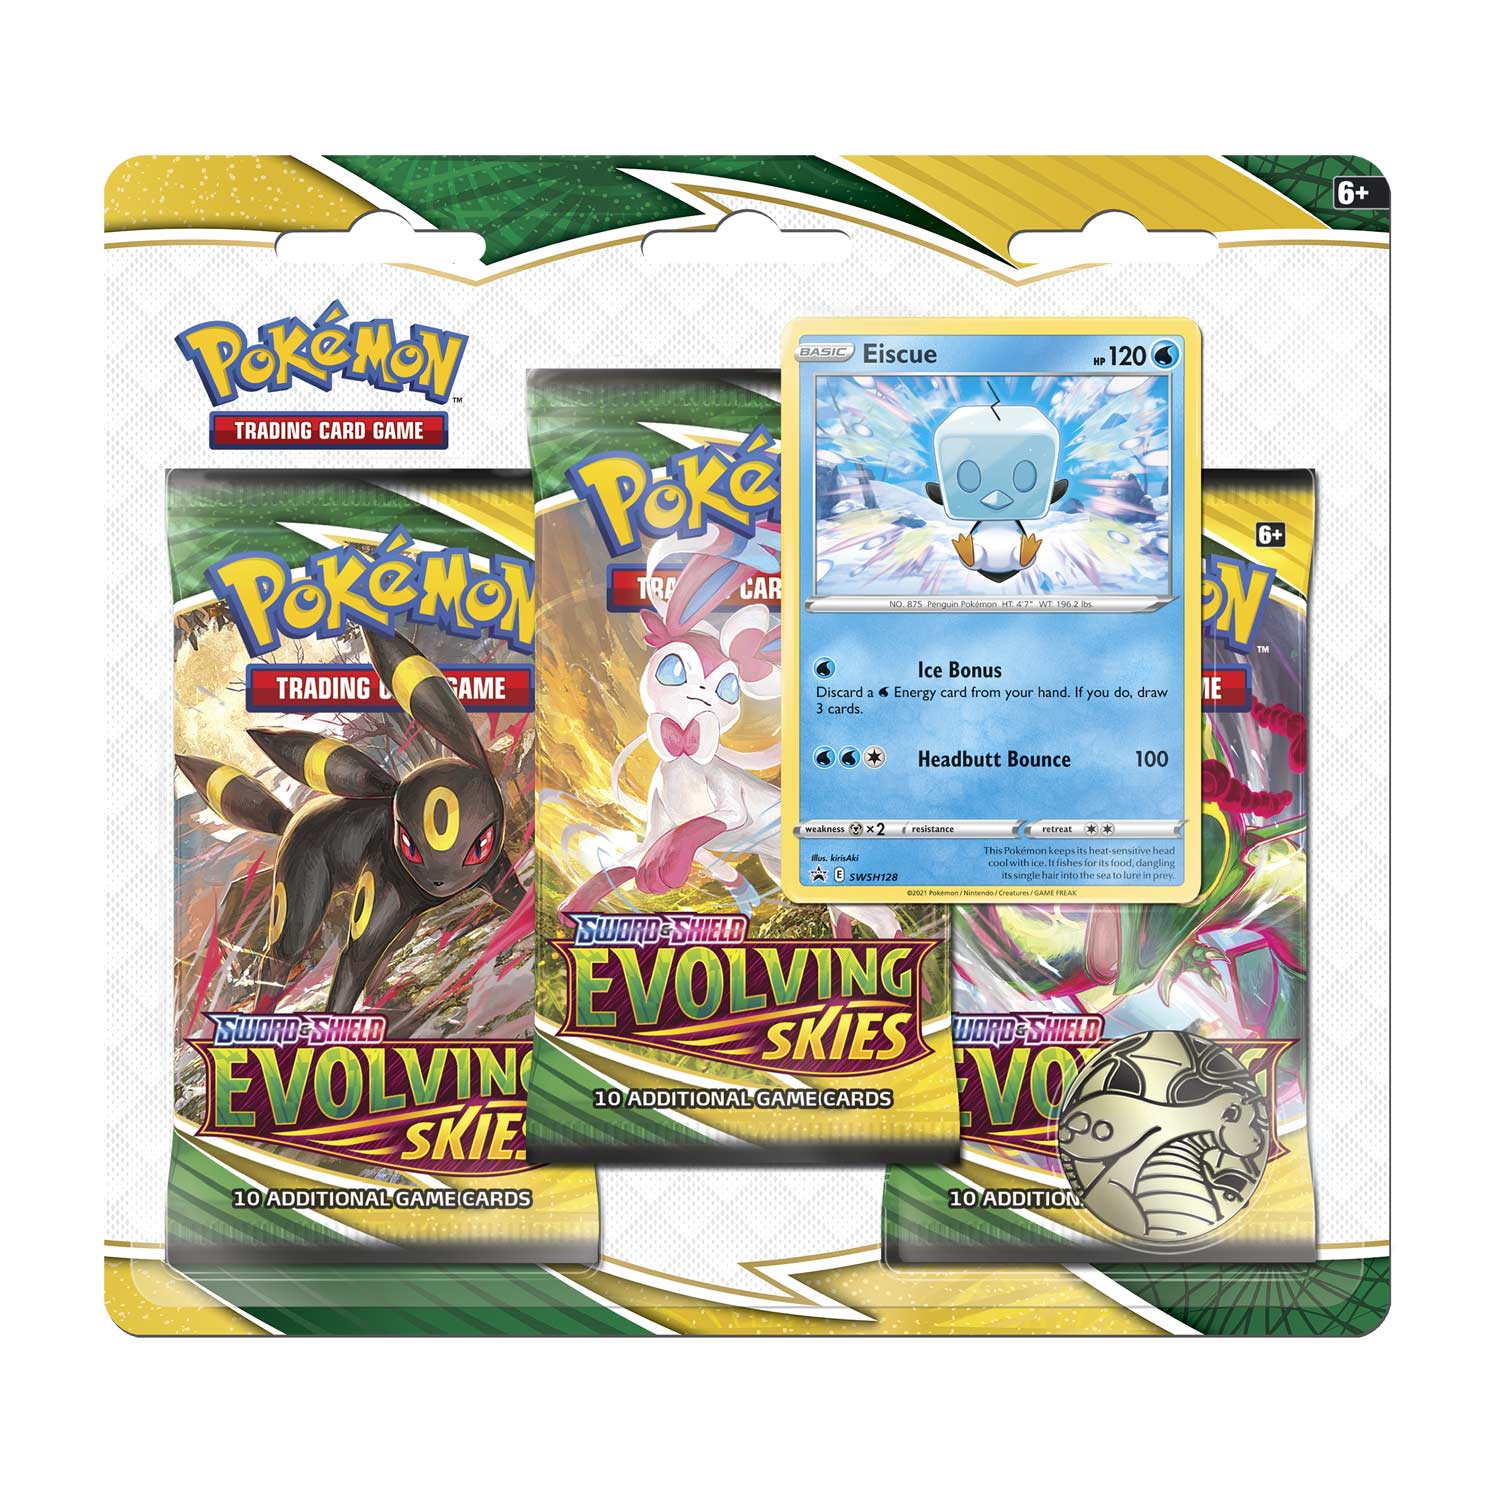 Pokemon Trading Card Game Sword and Shield Evolving Skies Three Booster Packs 